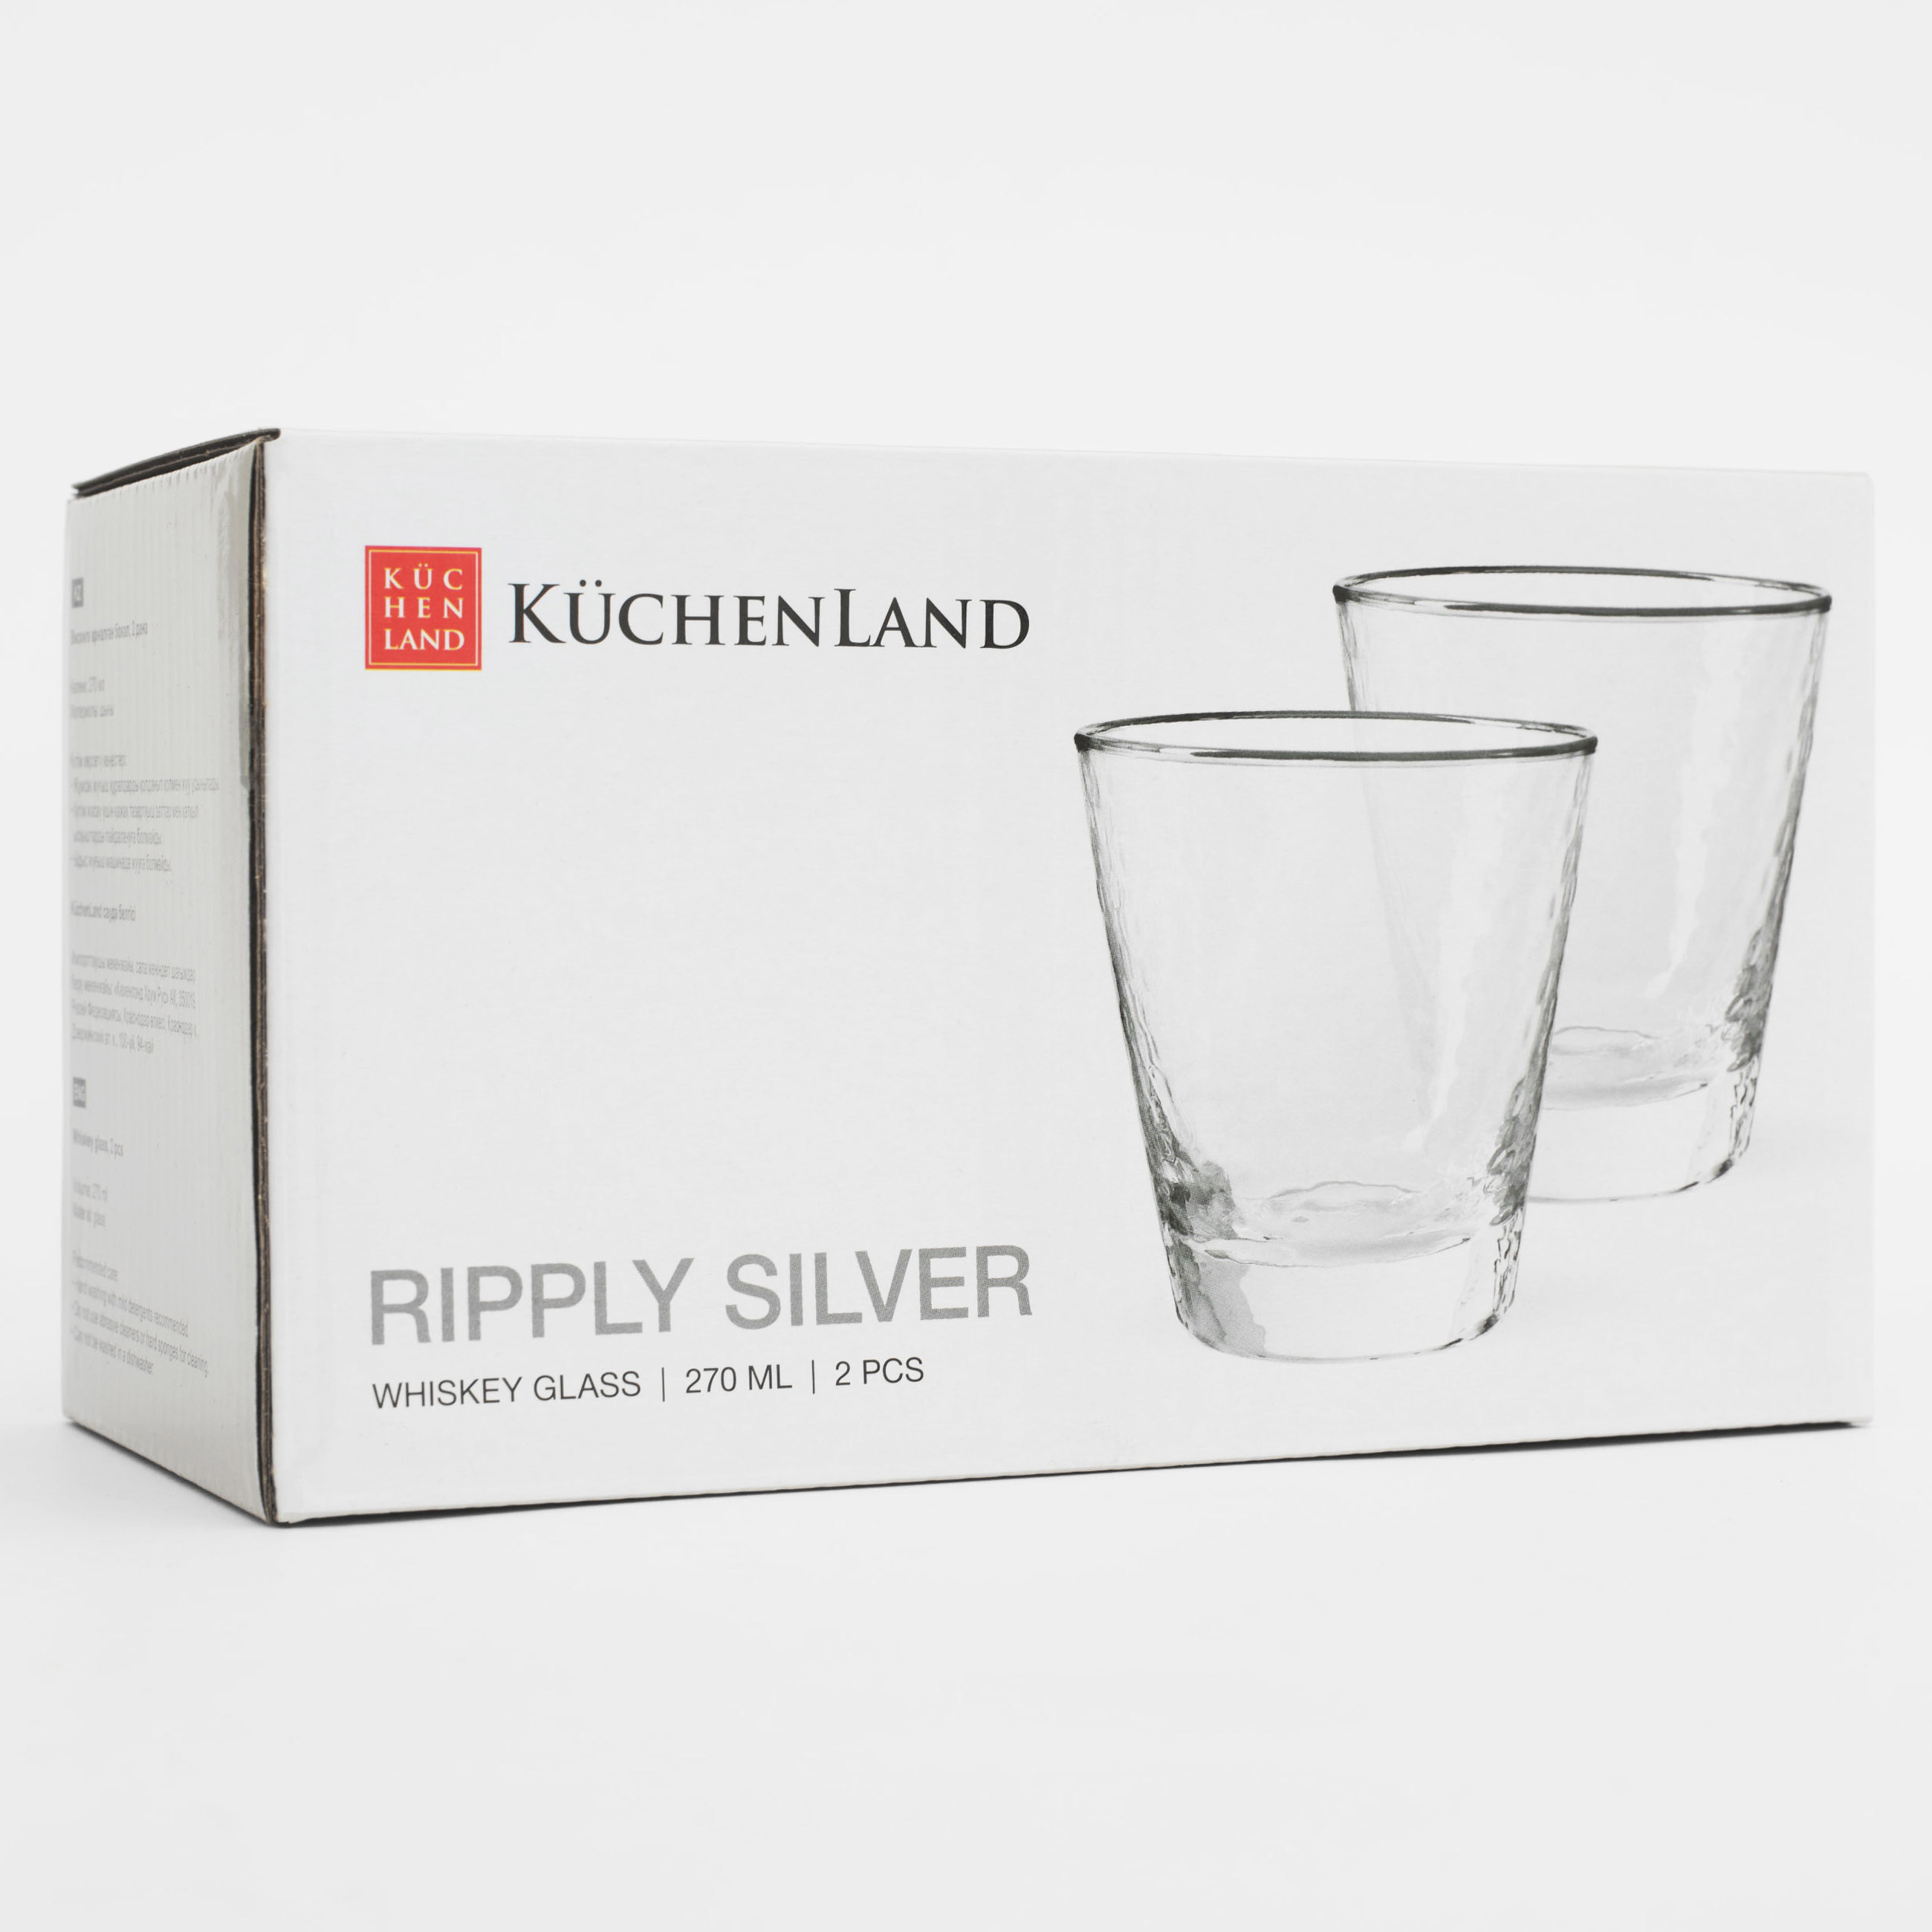 Whiskey glass, 270 ml, 2 pcs, glass, with silver edging, Ripply silver изображение № 6